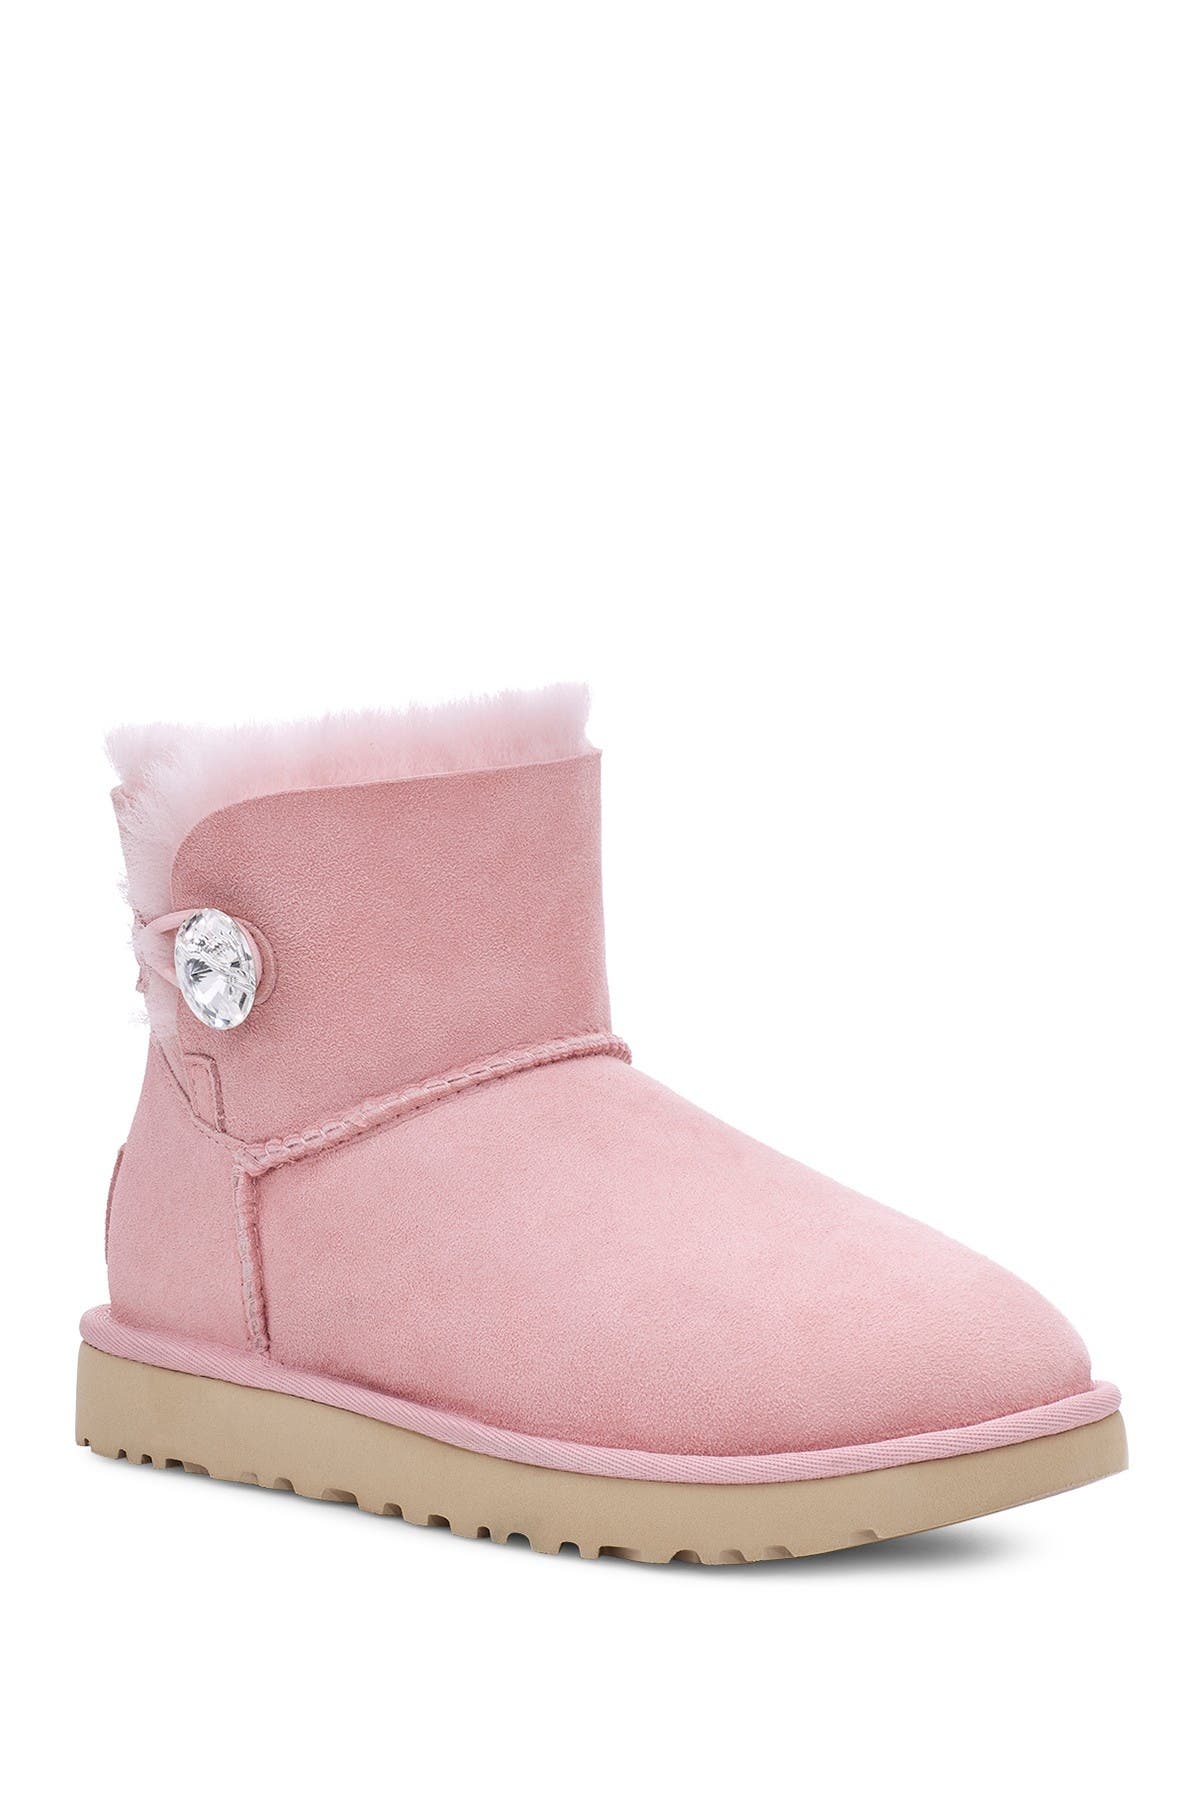 ugg boots button bling